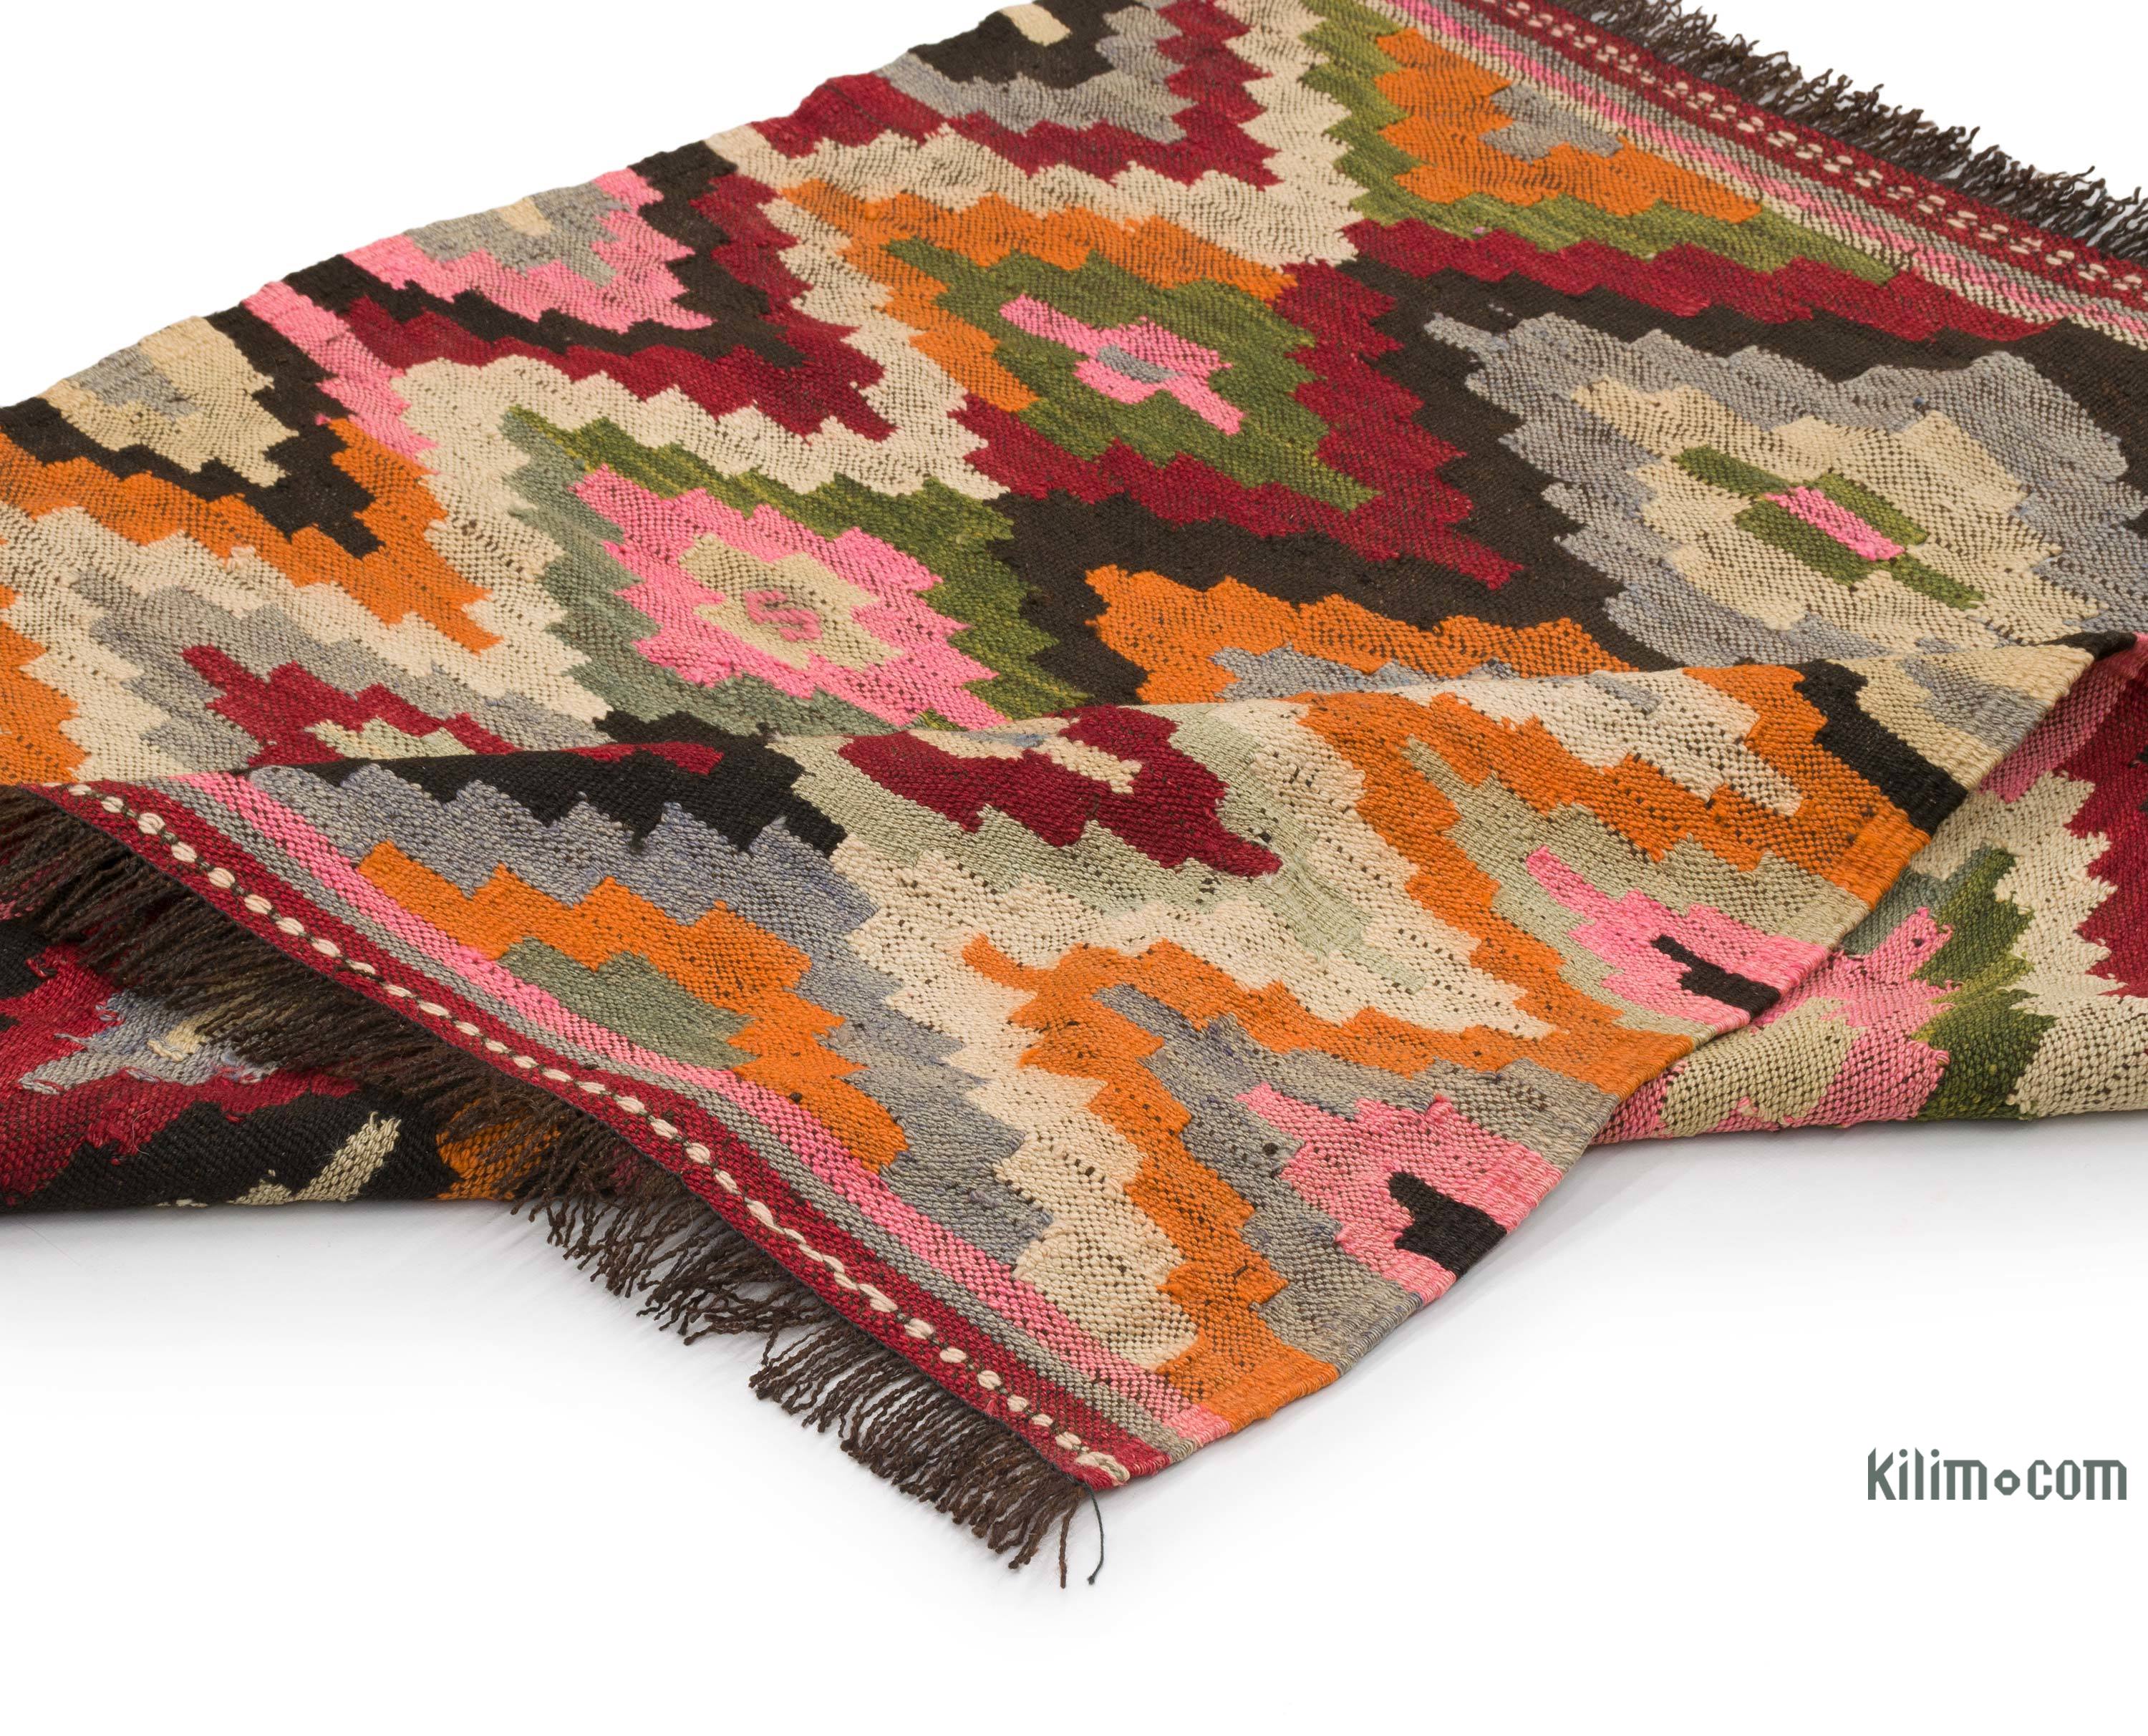 K0068186 Vintage Afyon Kilim Rug - 3' 4 x 4' 8 (40 x 56)  The Source  for Vintage Rugs, Tribal Kilim Rugs, Wool Turkish Rugs, Overdyed Persian  Rugs, Runner Rugs, Patchwork